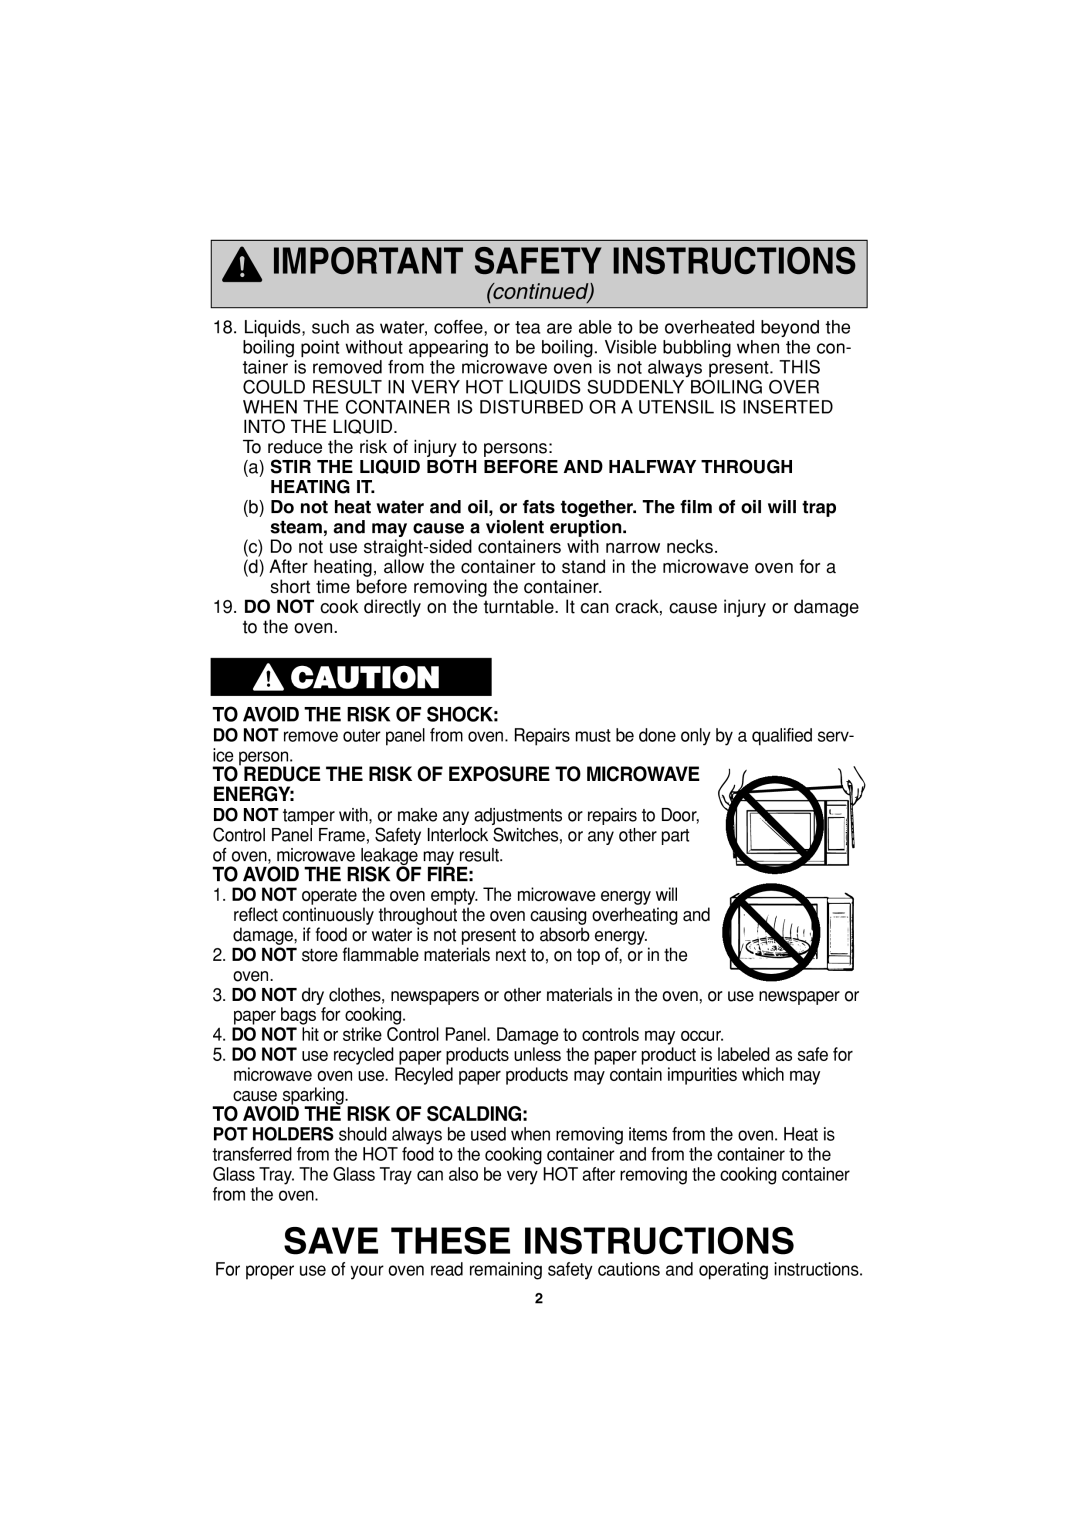 Panasonic NN-S553 Save These Instructions, continued, To Avoid The Risk Of Shock, Energy, To Avoid The Risk Of Fire 